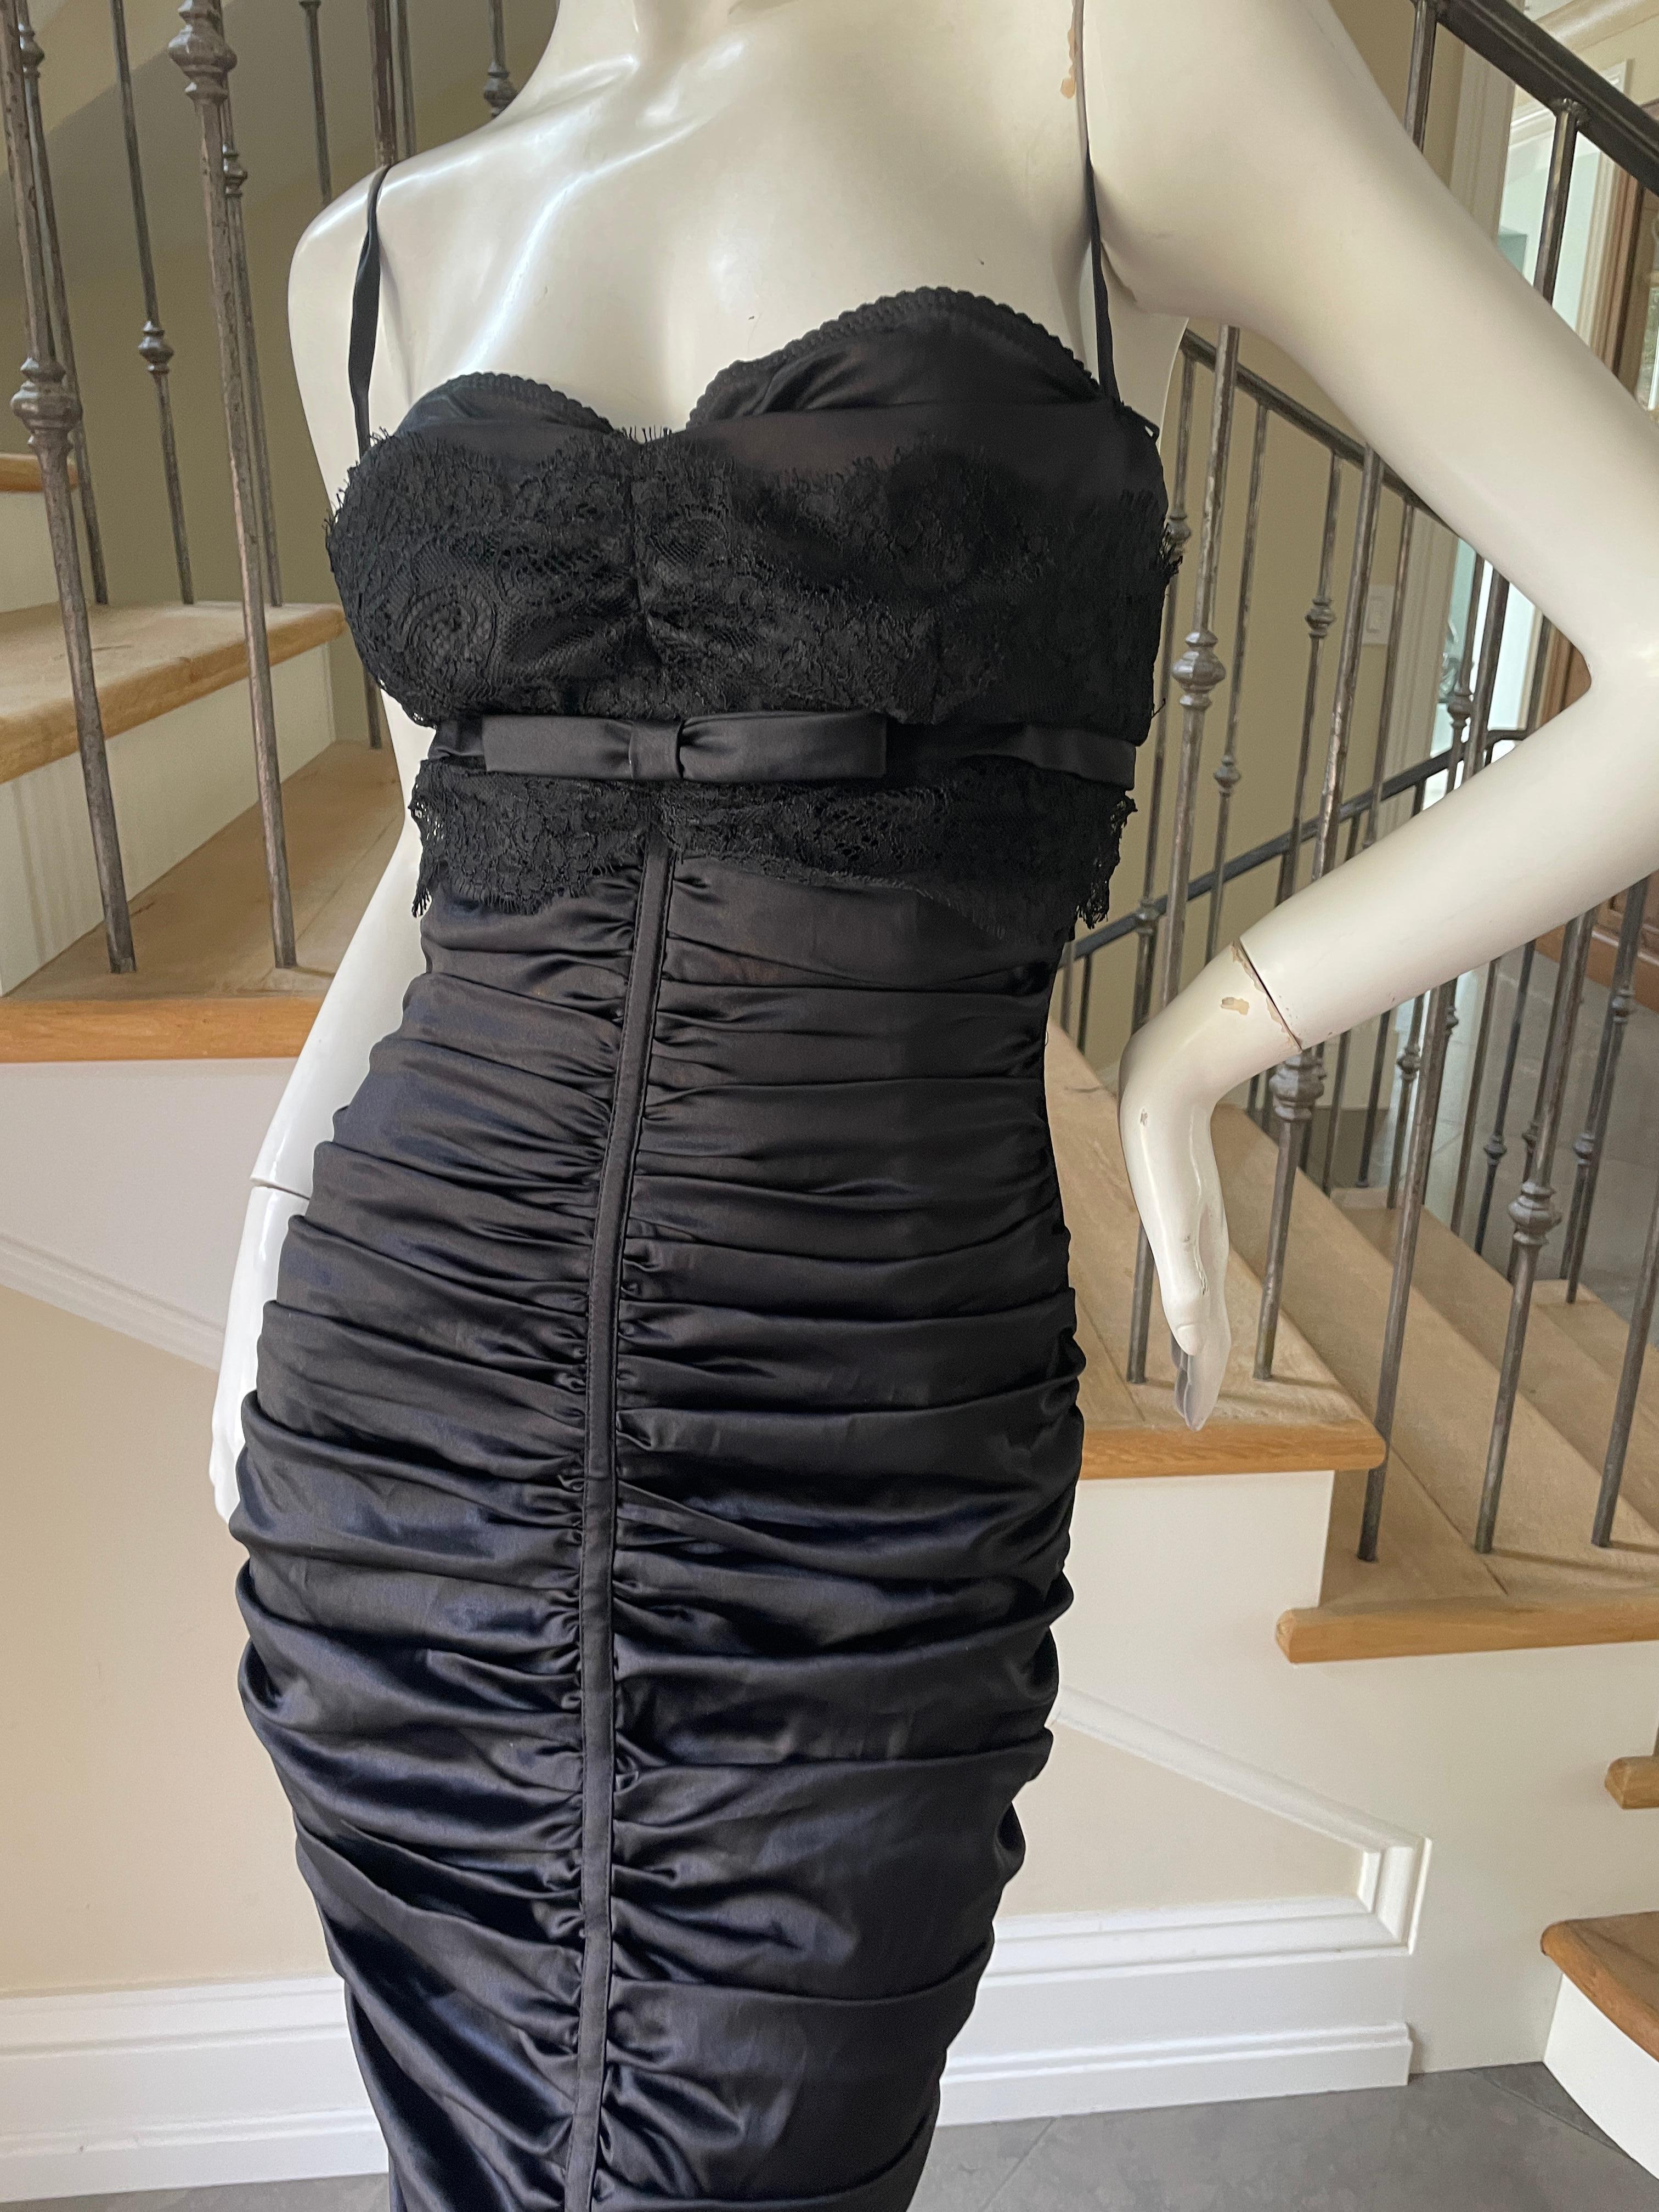 Dolce & Gabbana Vintage Black Cocktail Dress with Lace Bra and Leopard Lining For Sale 1